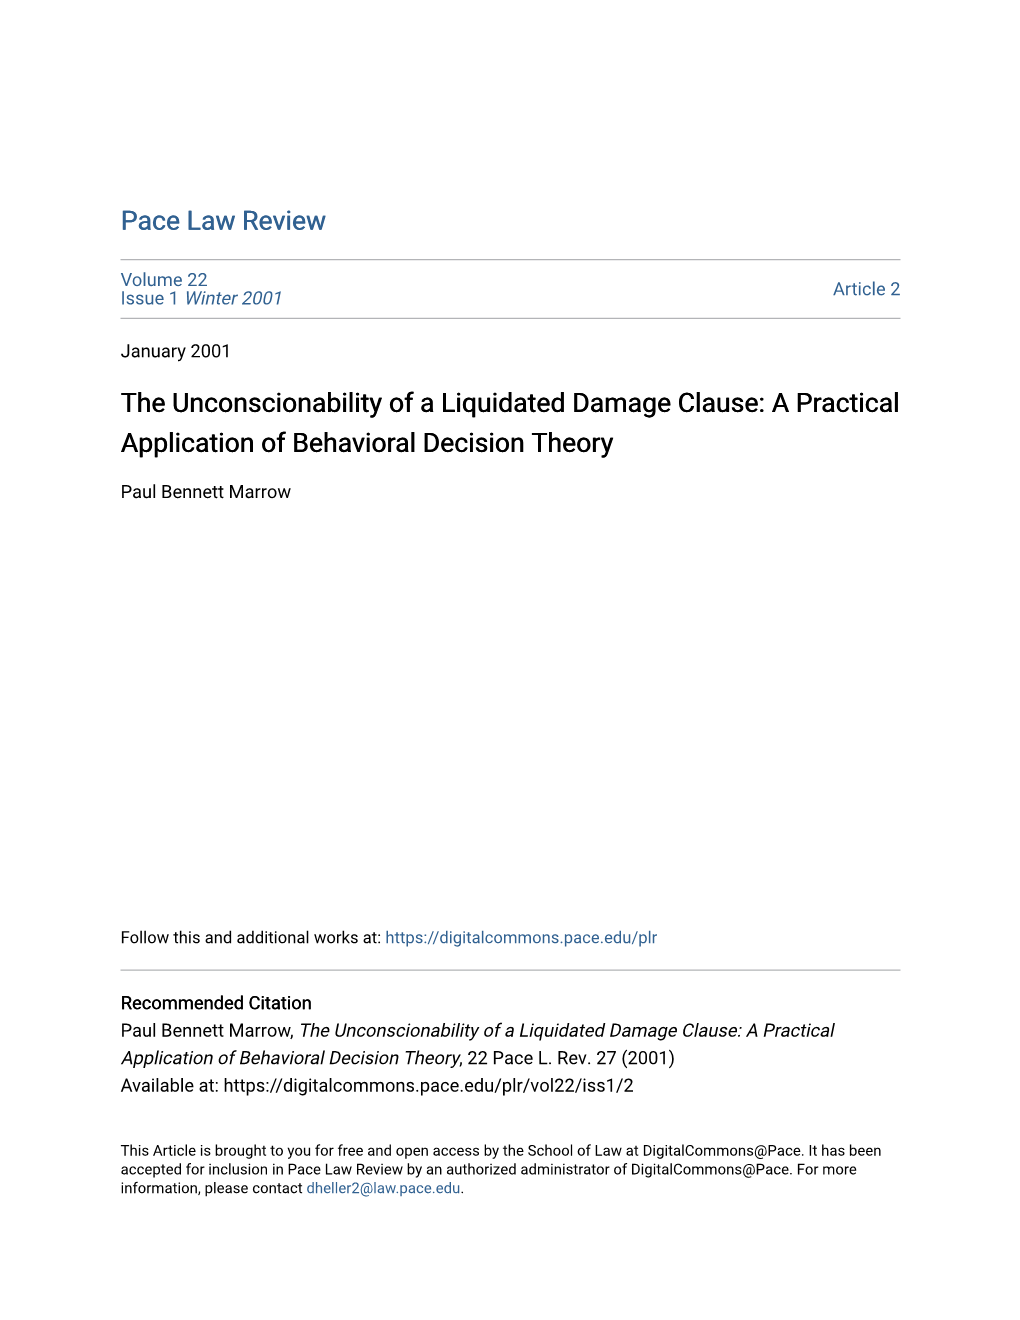 The Unconscionability of a Liquidated Damage Clause: a Practical Application of Behavioral Decision Theory